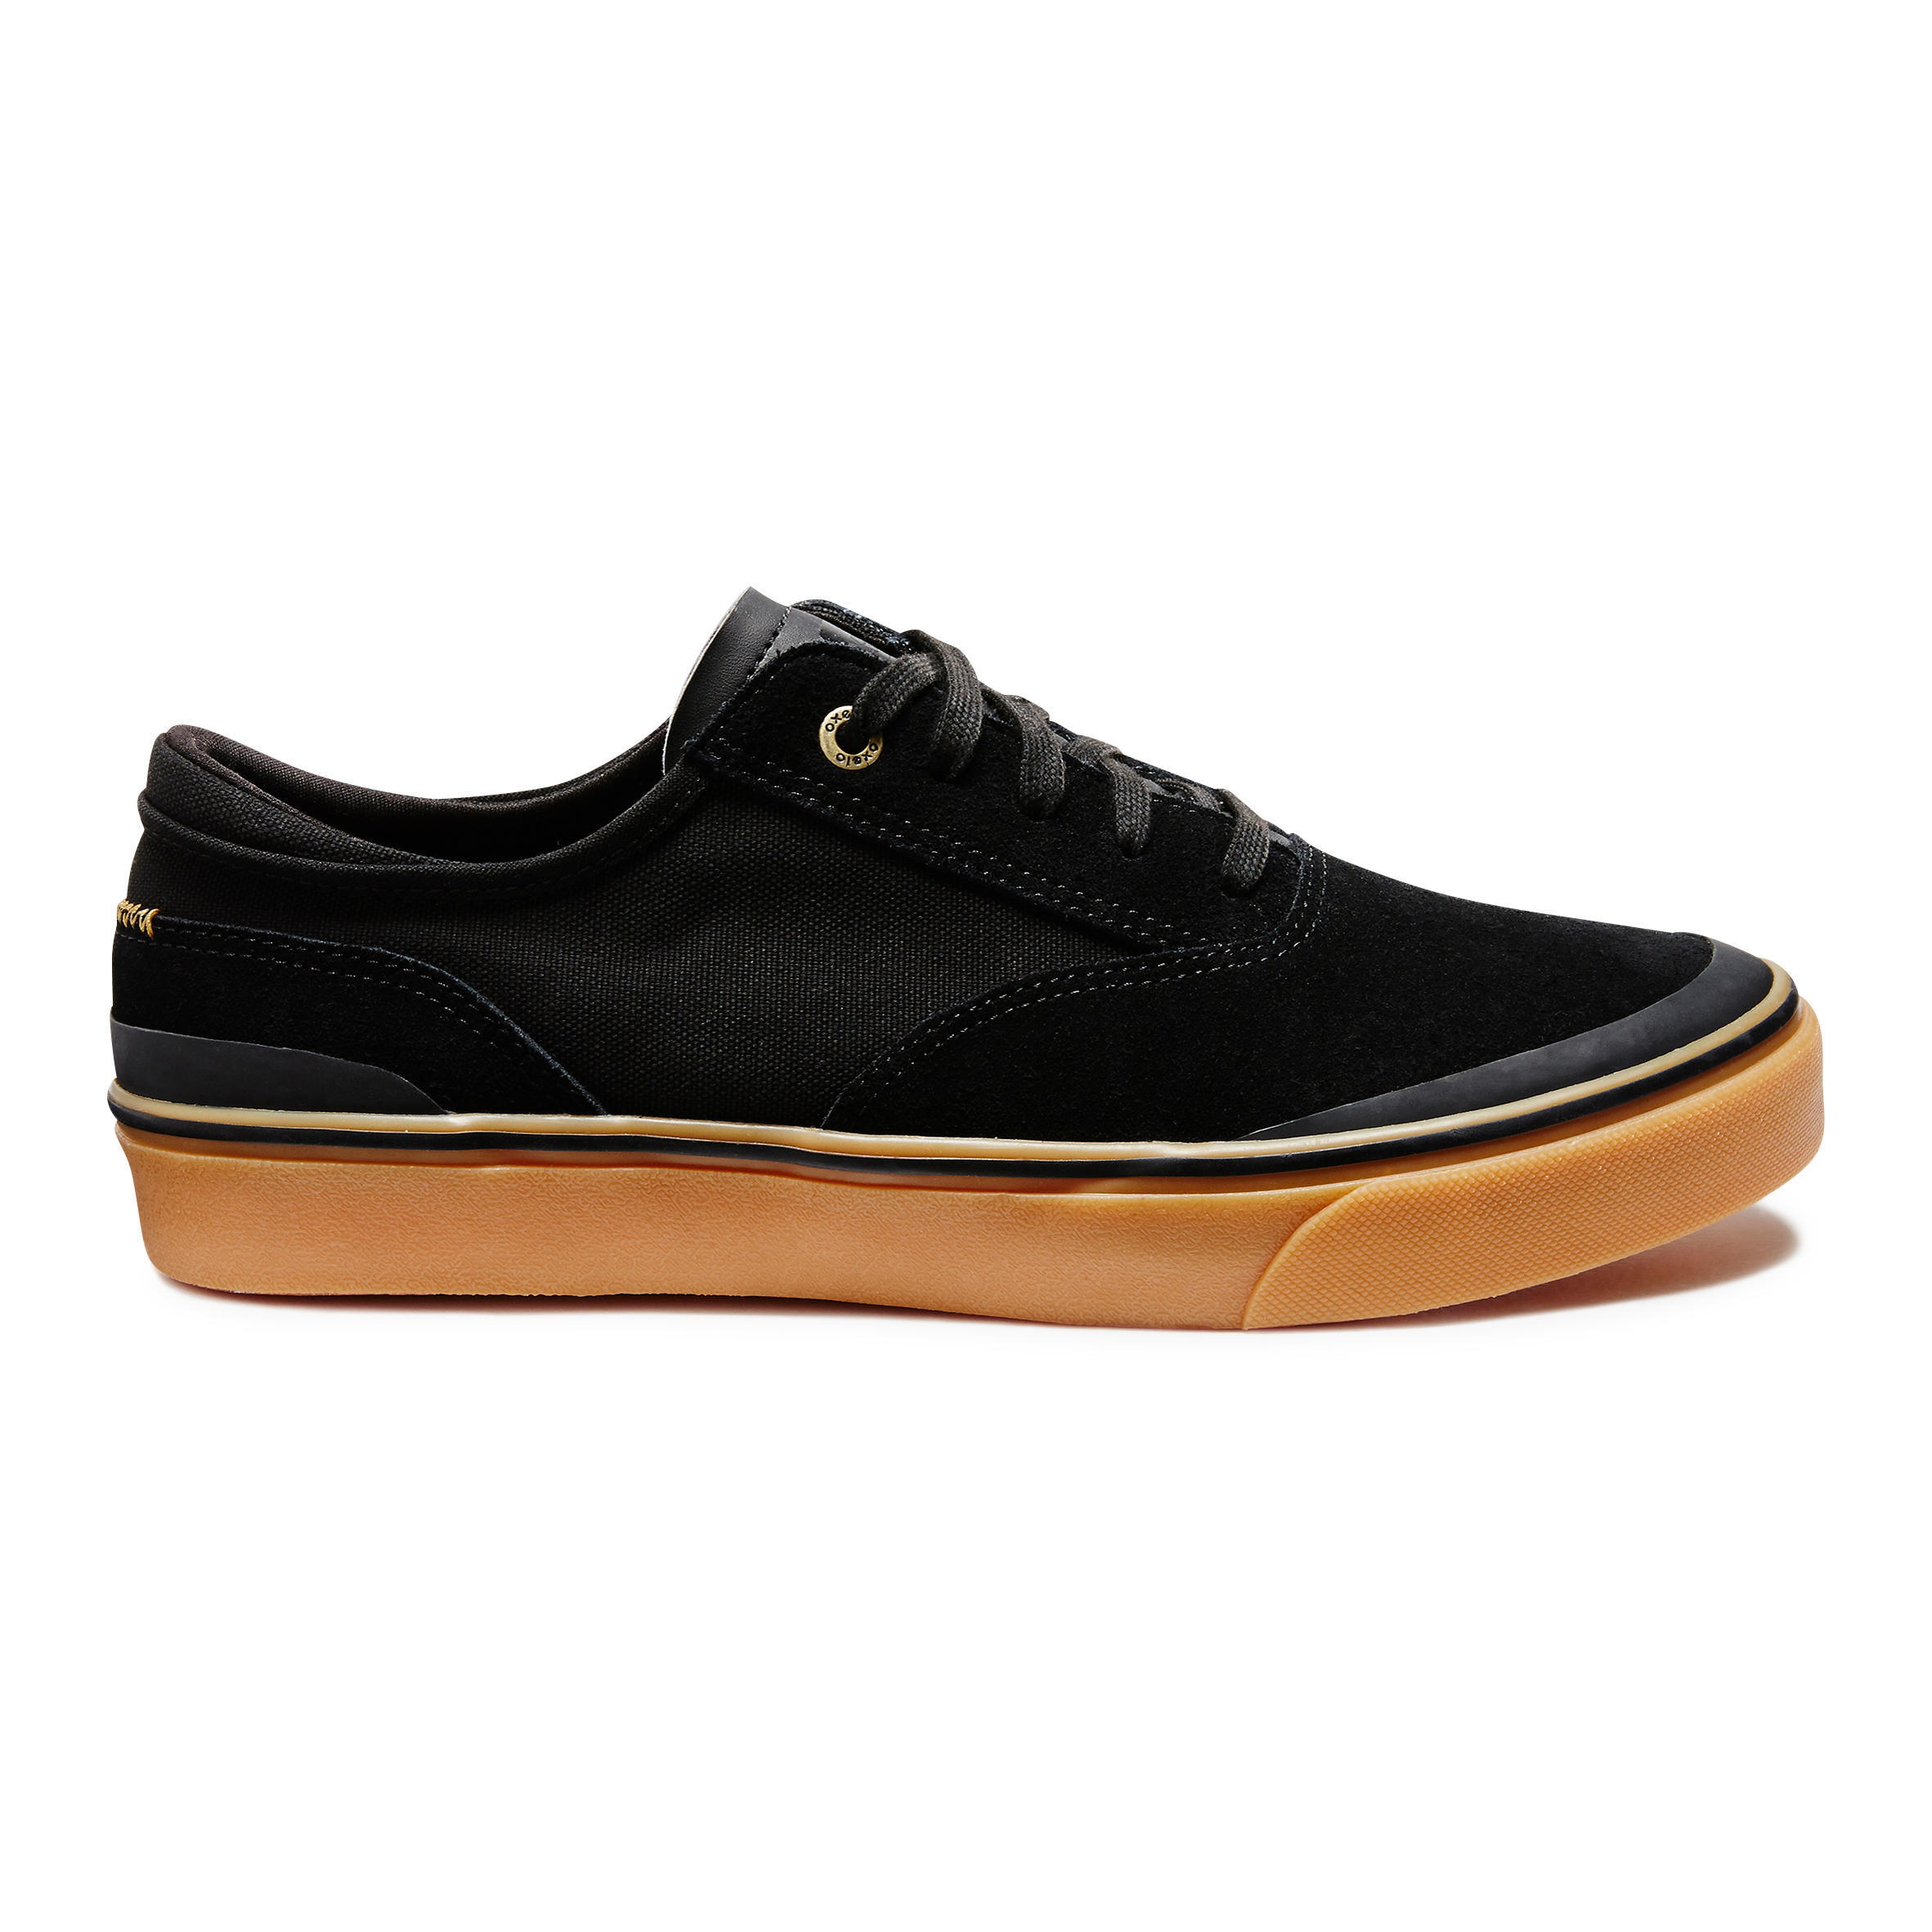 Vulca 500 Adult Low-Top Skate Shoes - Black/Rubber Sole 2/6